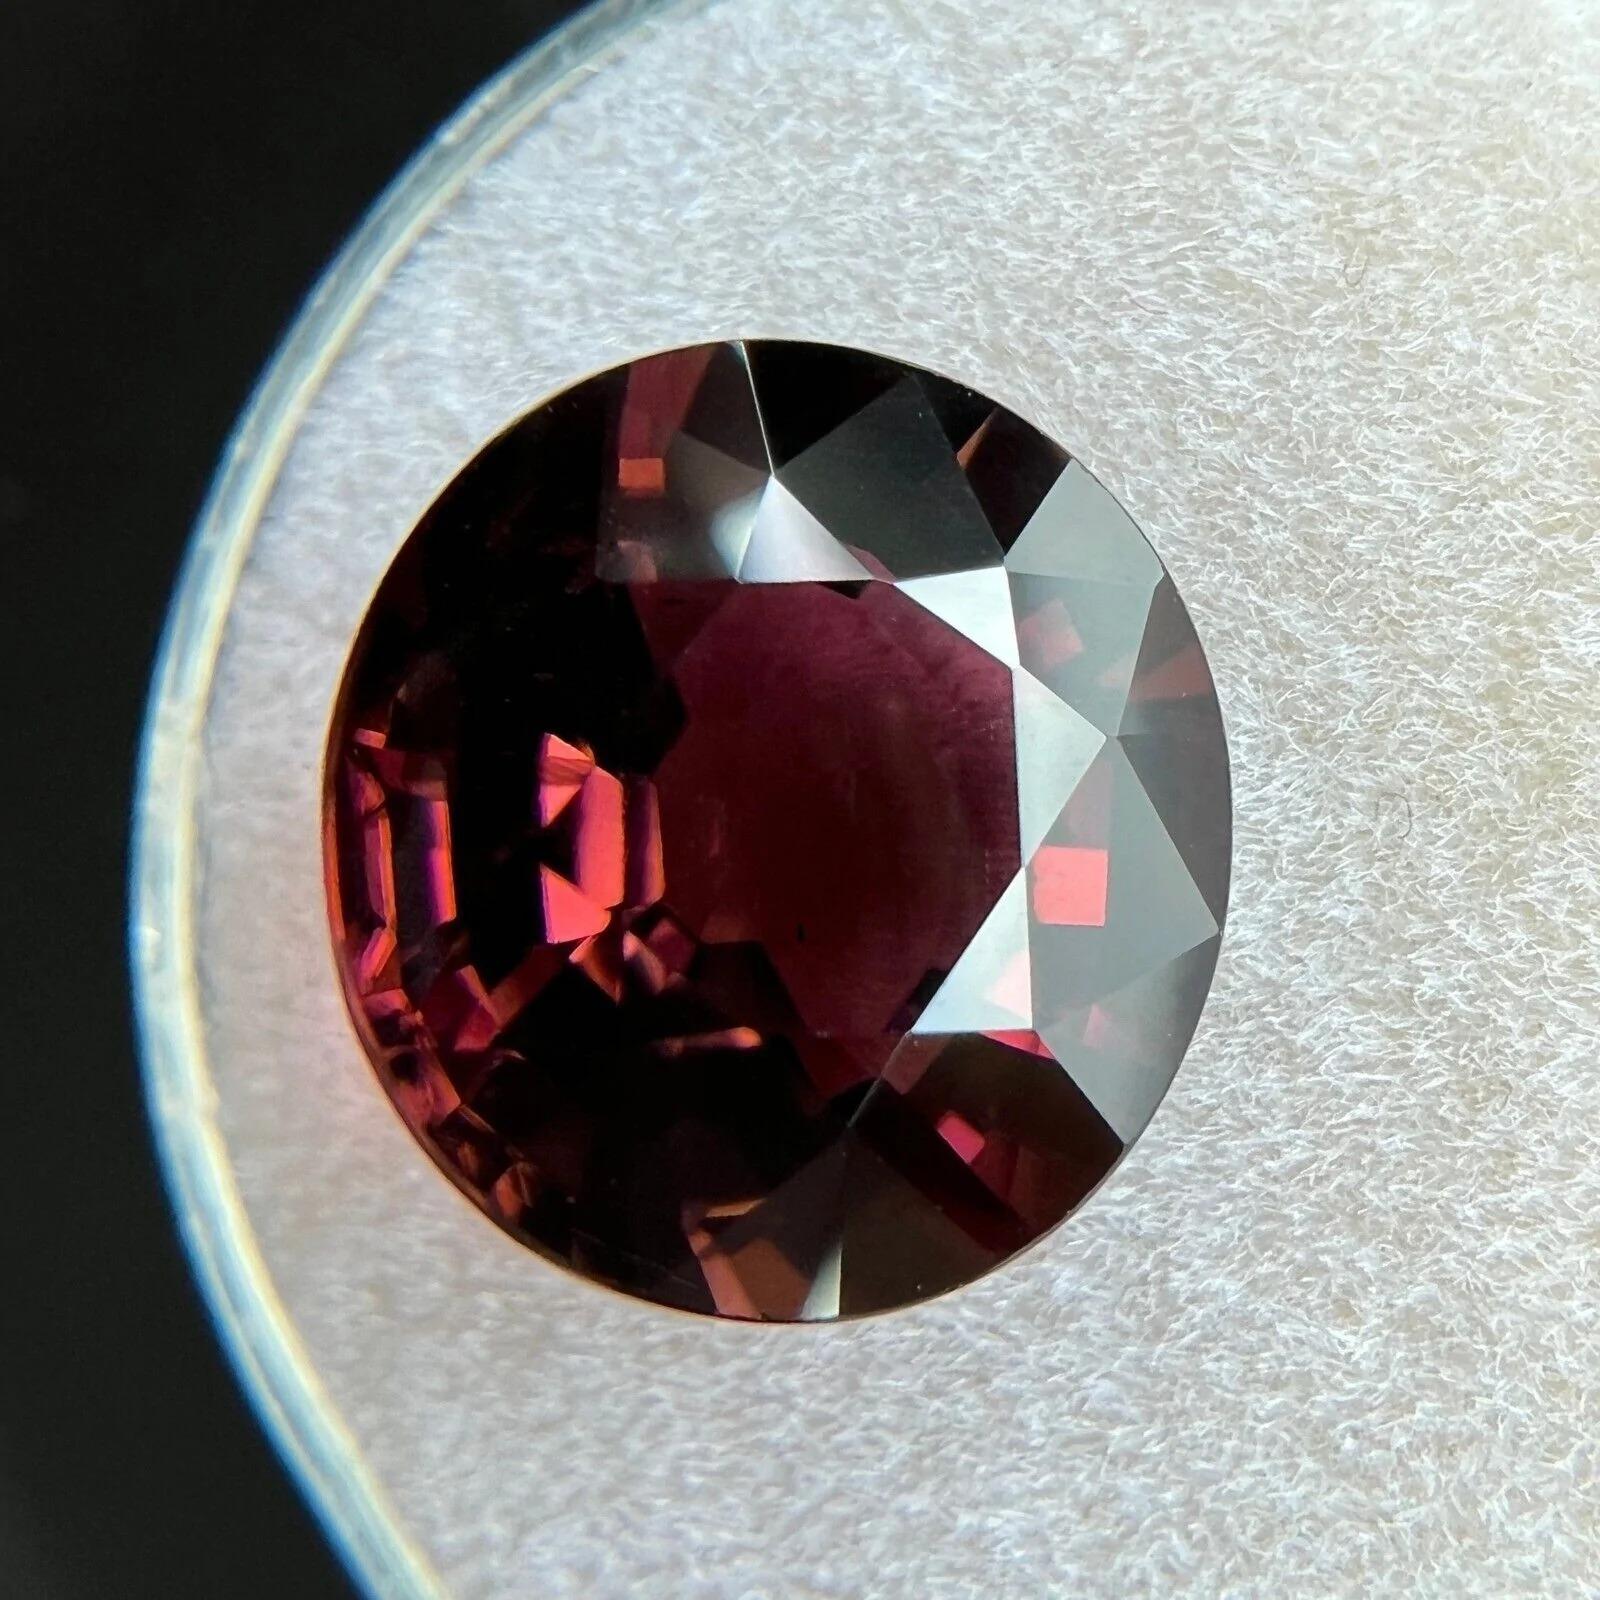 Top Grade 6.64ct GIA Certified Natural Tourmaline Red Purple Untreated Round Cut

Rare Untreated Purple Red Tourmaline Gemstone. 
Large 6.64 carat tourmaline with a beautiful reddish purple colour. Fully certified by GIA confirming stone as natural.